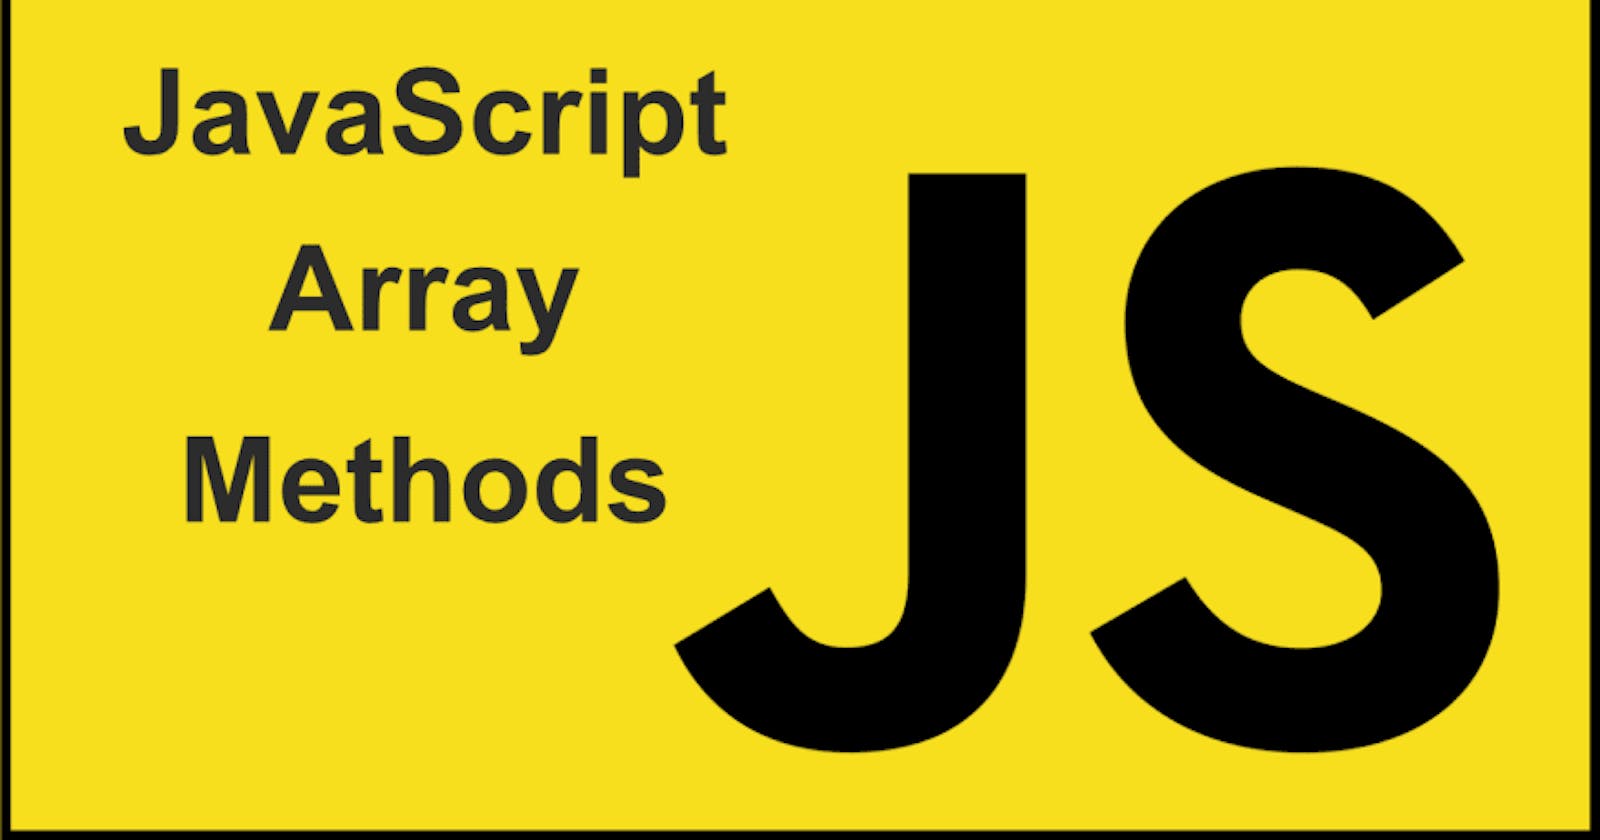 Working with the array in JavaScript